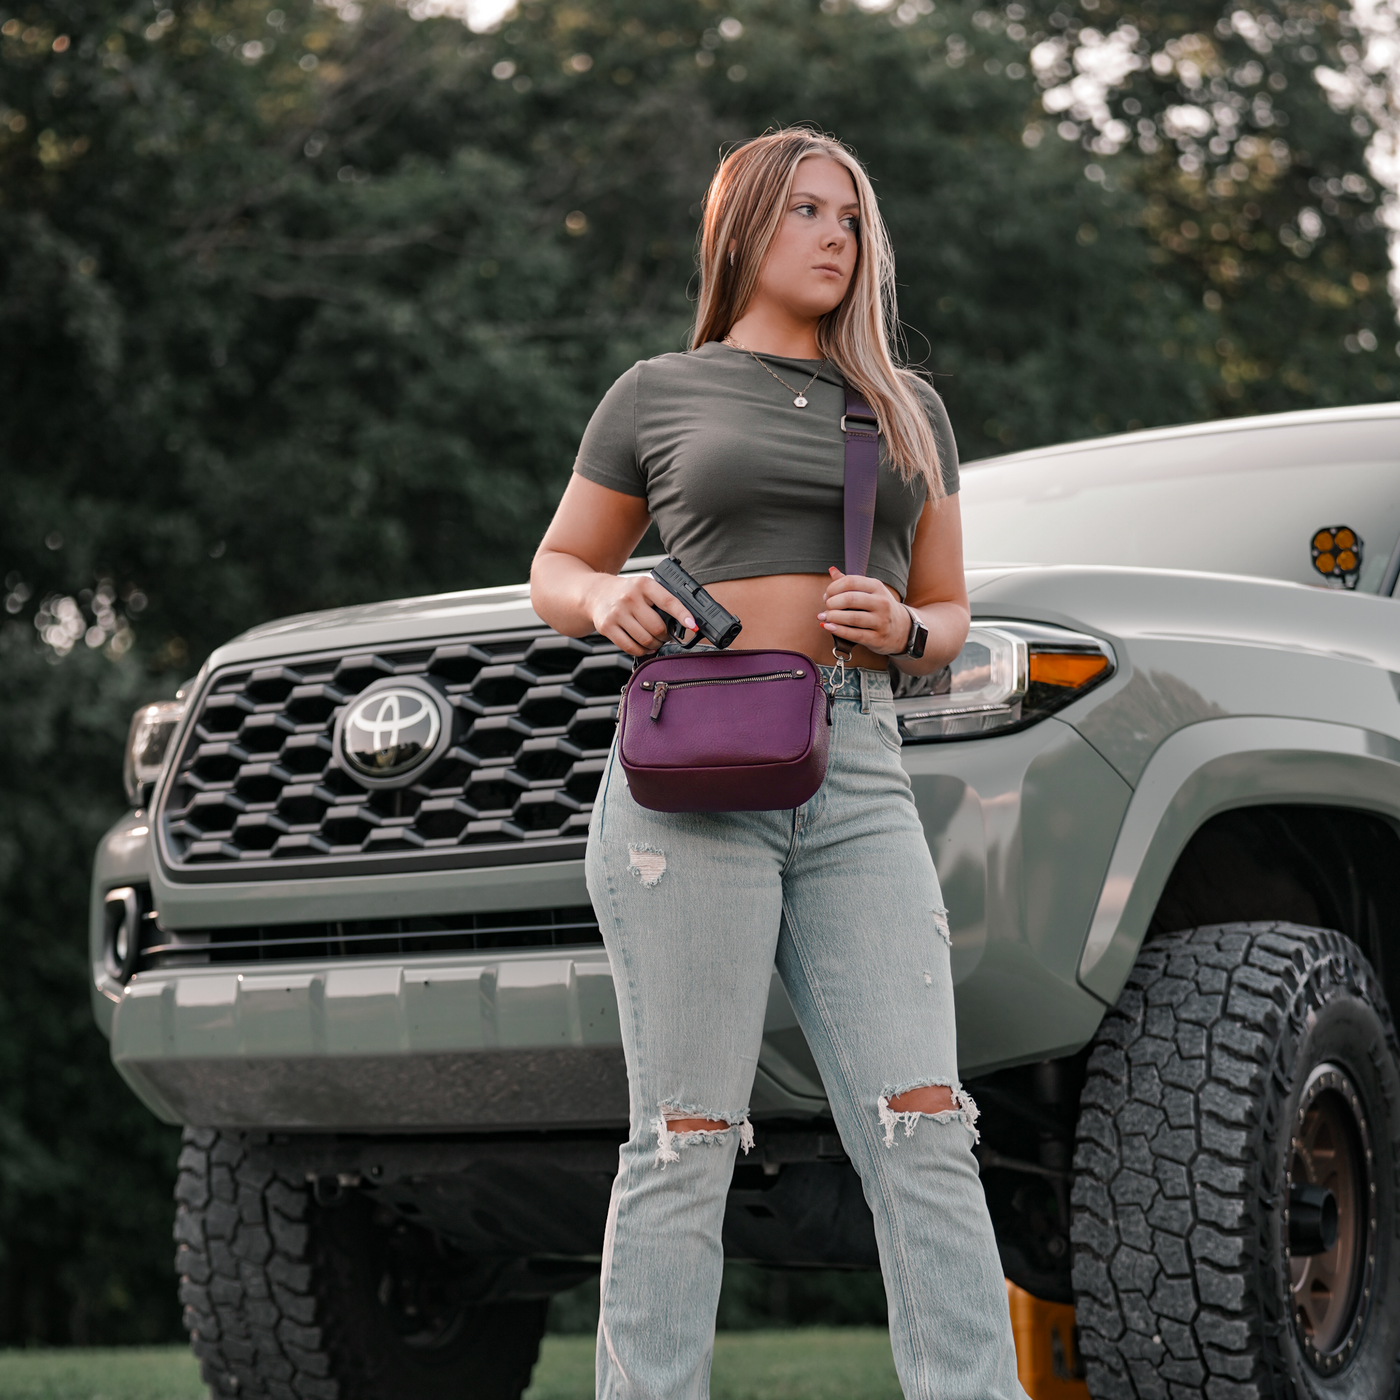 Beverly Compact Conceal Carry Crossbody Camera Bag